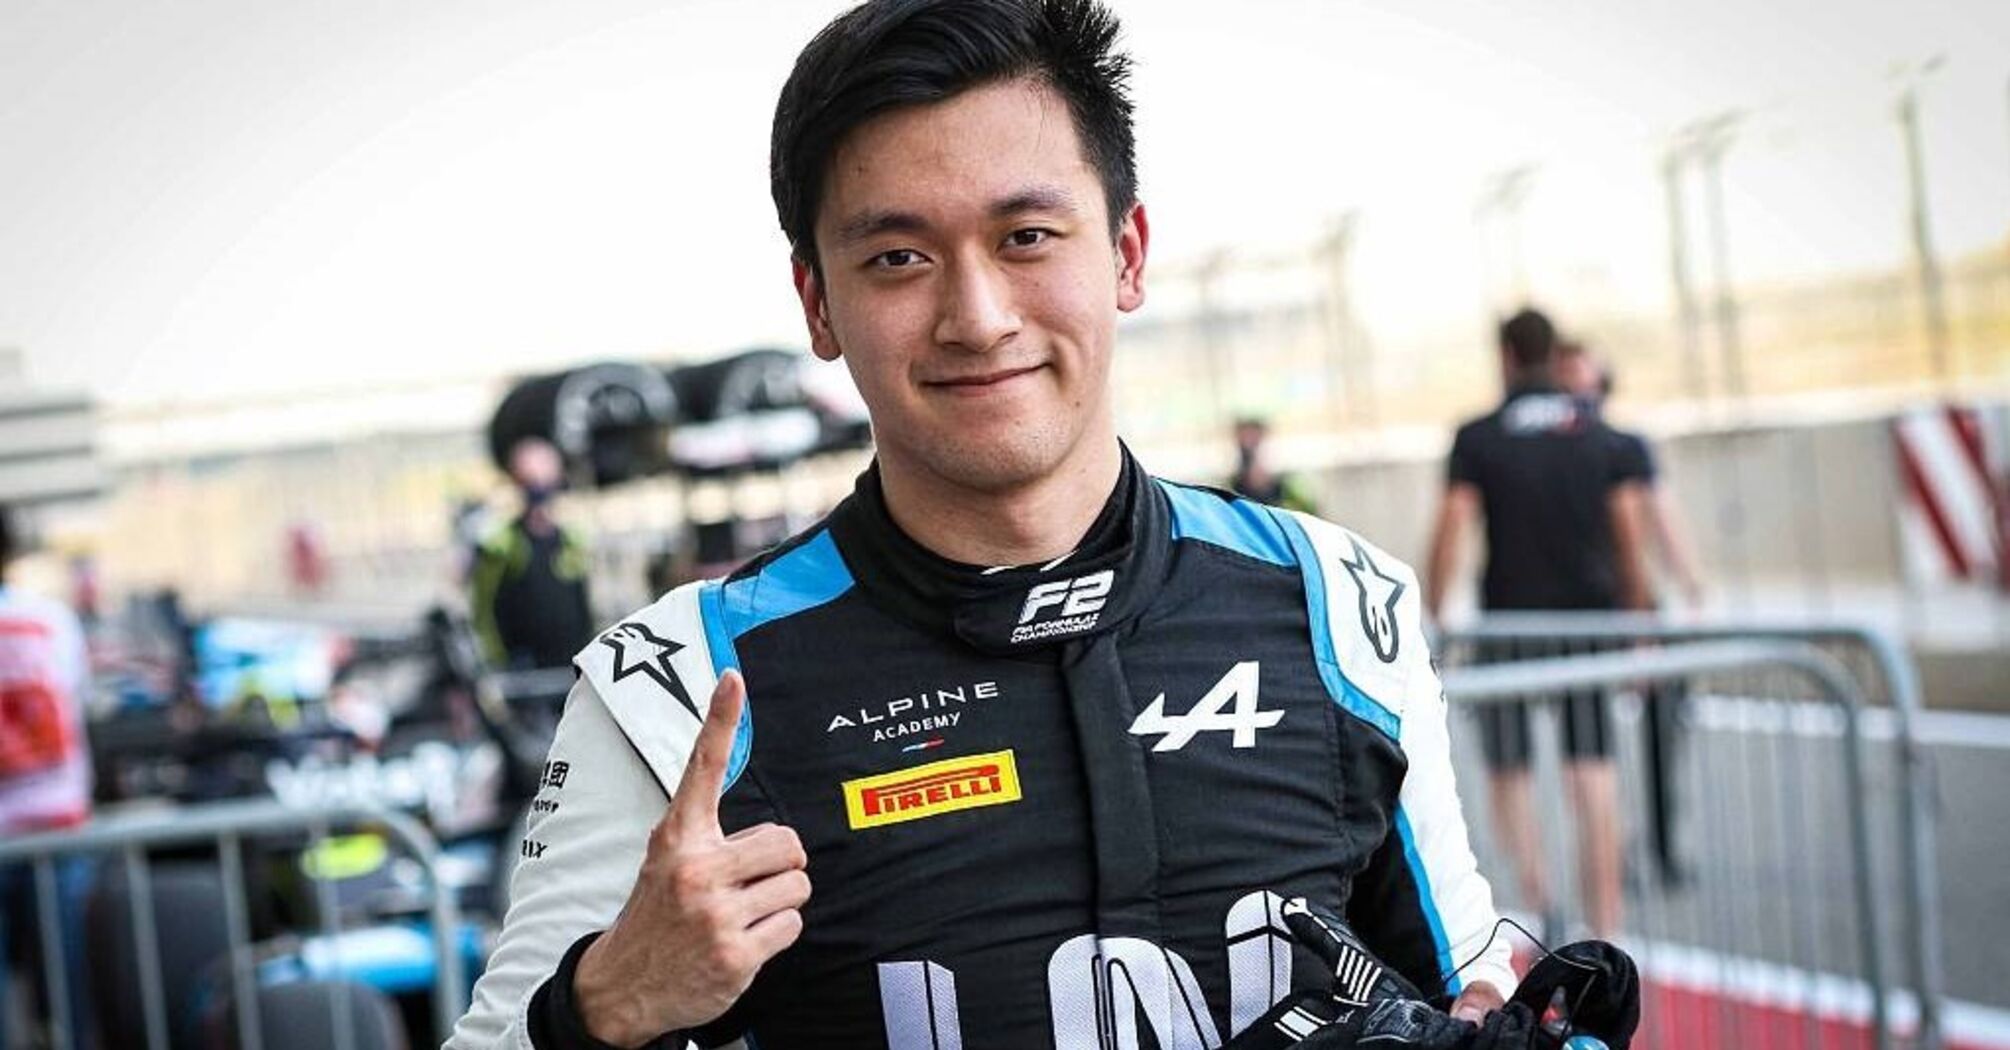 First Chinese racer in F1 history: Zhou Guanyu's inspiring journey over the years